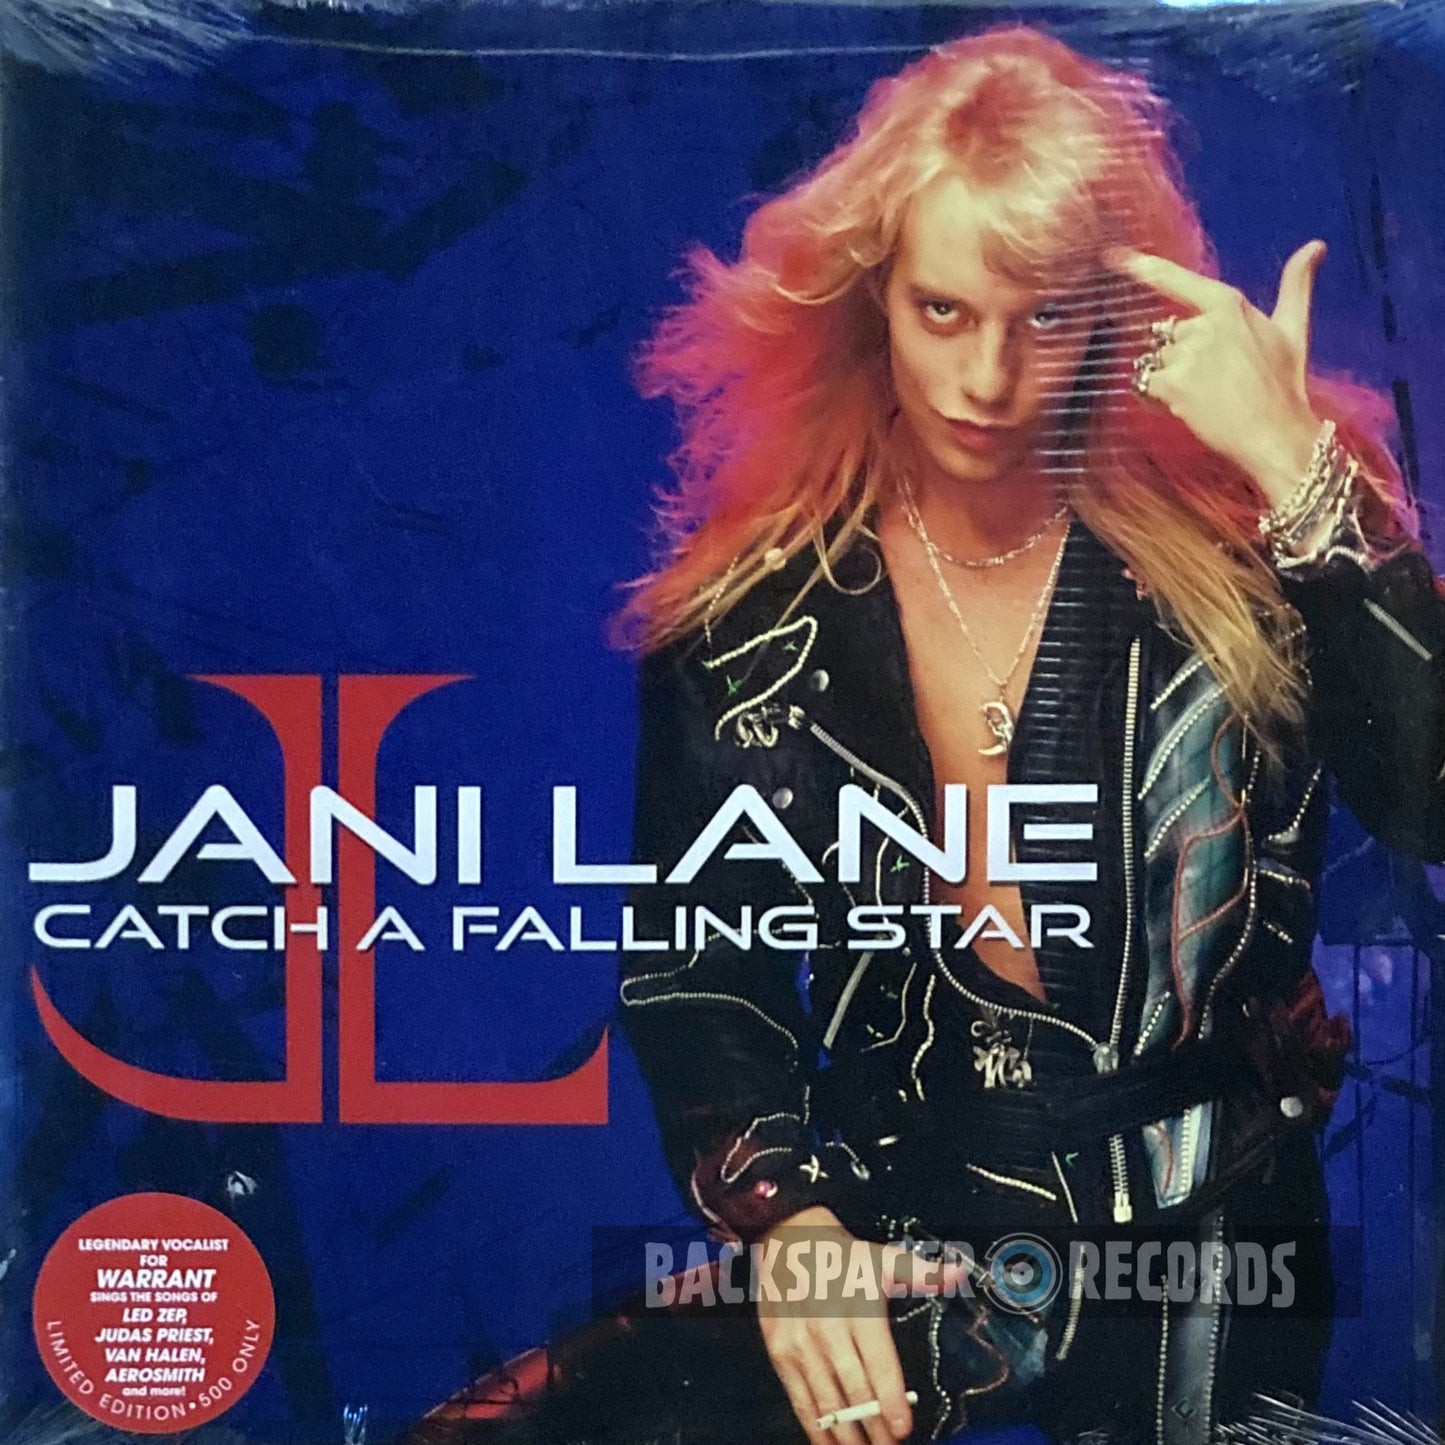 Jani Lane – Catch A Falling Star (Limited Edition) LP (Sealed)